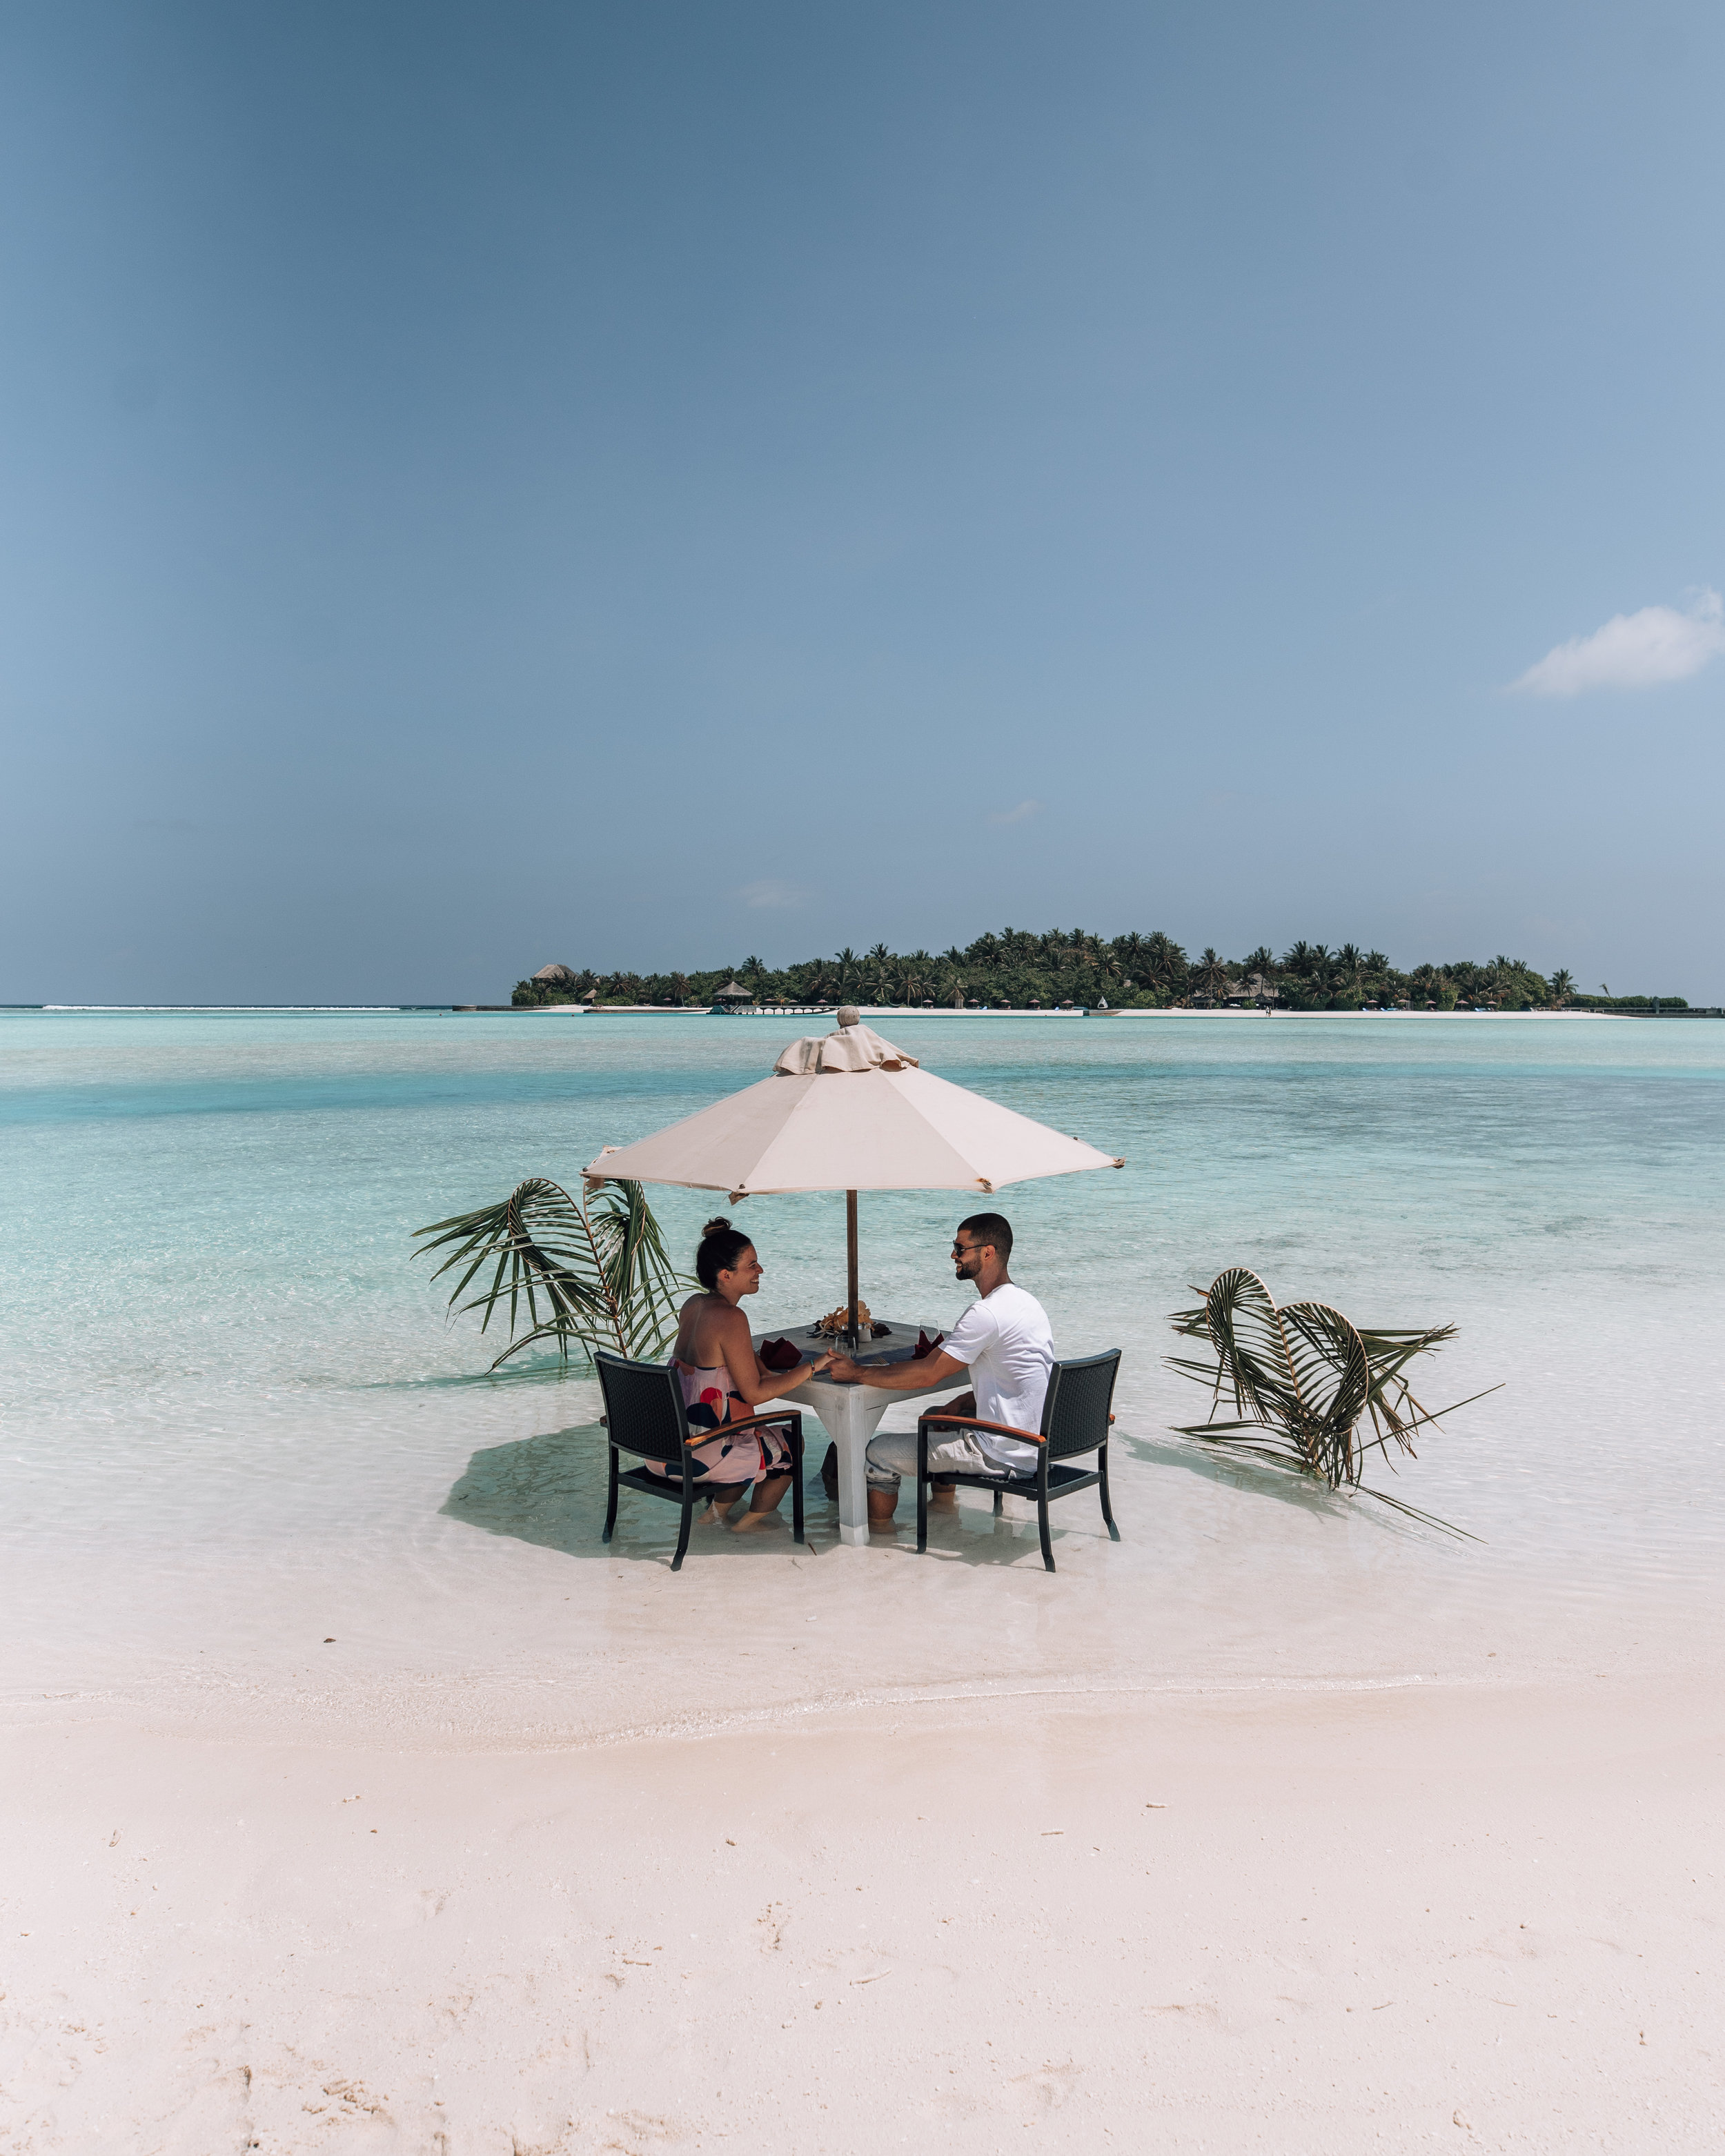  Find out everything you need to know about staying at one of the best resorts in the Maldives, Anantara Dhigu. #maldives #honeymoon #allinclusive #maldiveshotels #luxuryhotels | maldives all inclusive resorts | maldives honeymoon all inclusive | ana